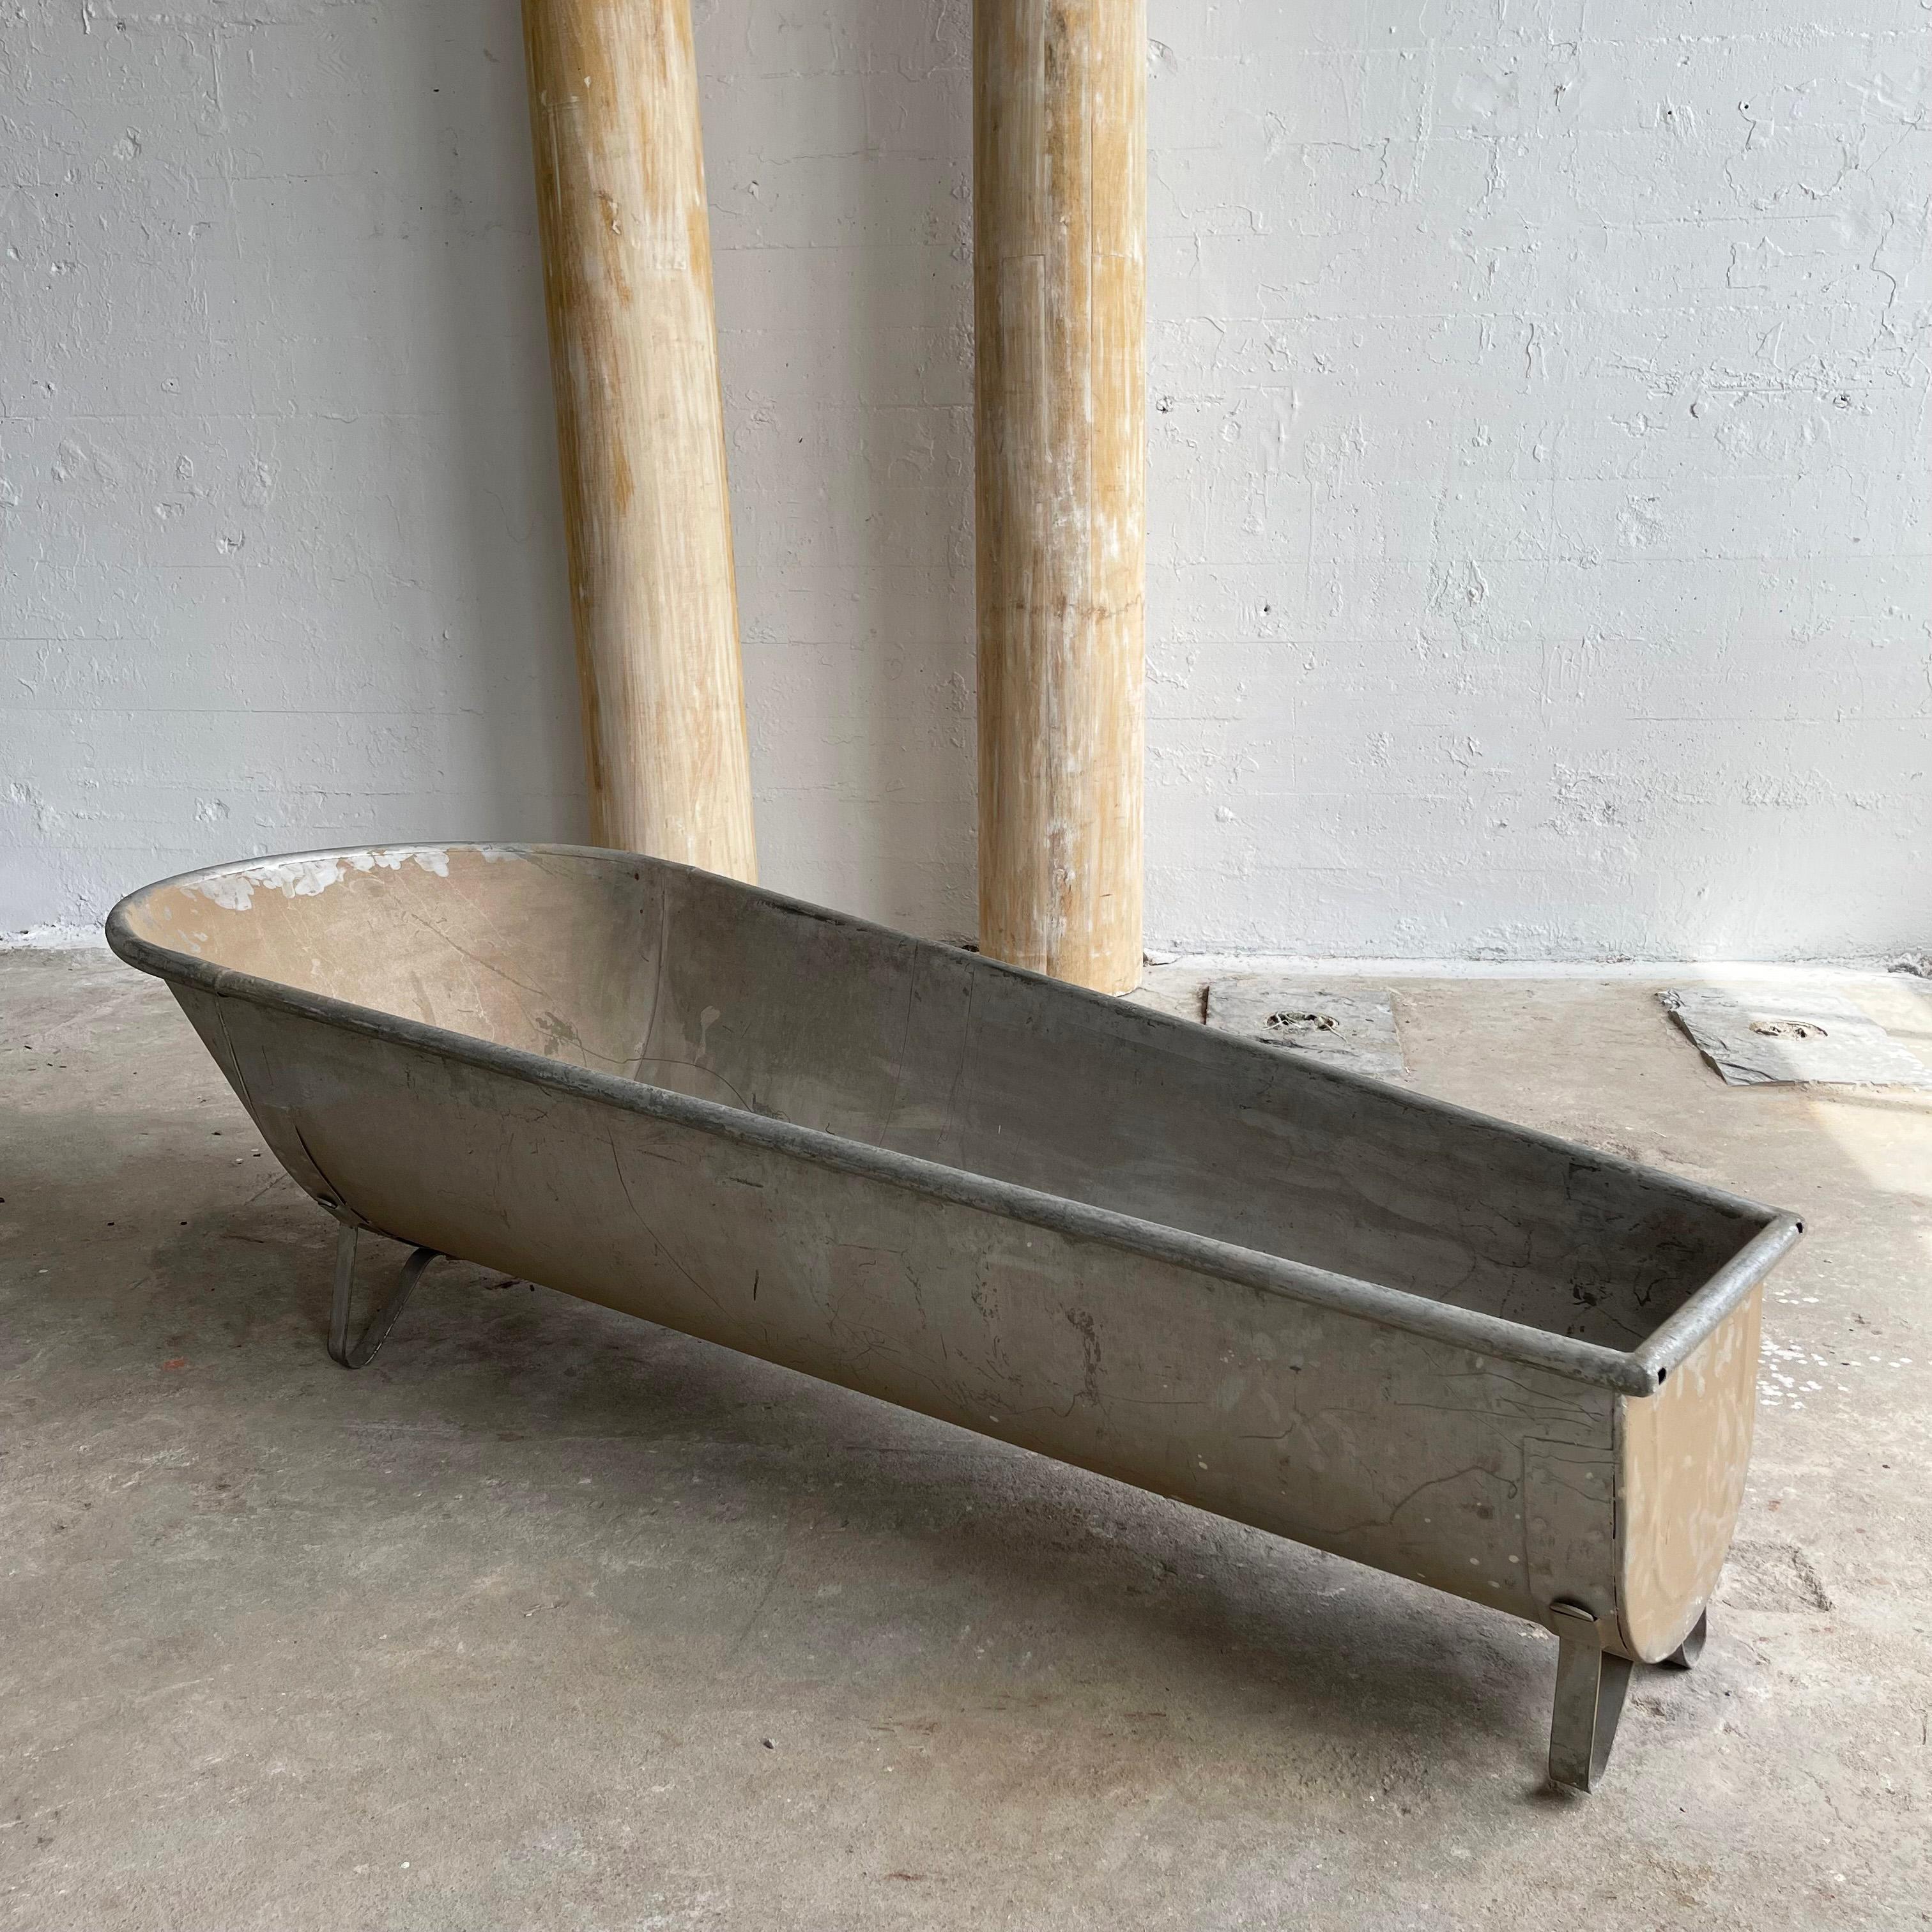 Antique, galvanized tin, cowboy wash tub circa 1890's is a gorgeous addition to any rustic, primitive or industrial decor. The full sized tub tapers from 27 inches to 14 inches and slopes from 19 inches to 15 inches height. There is a drain present